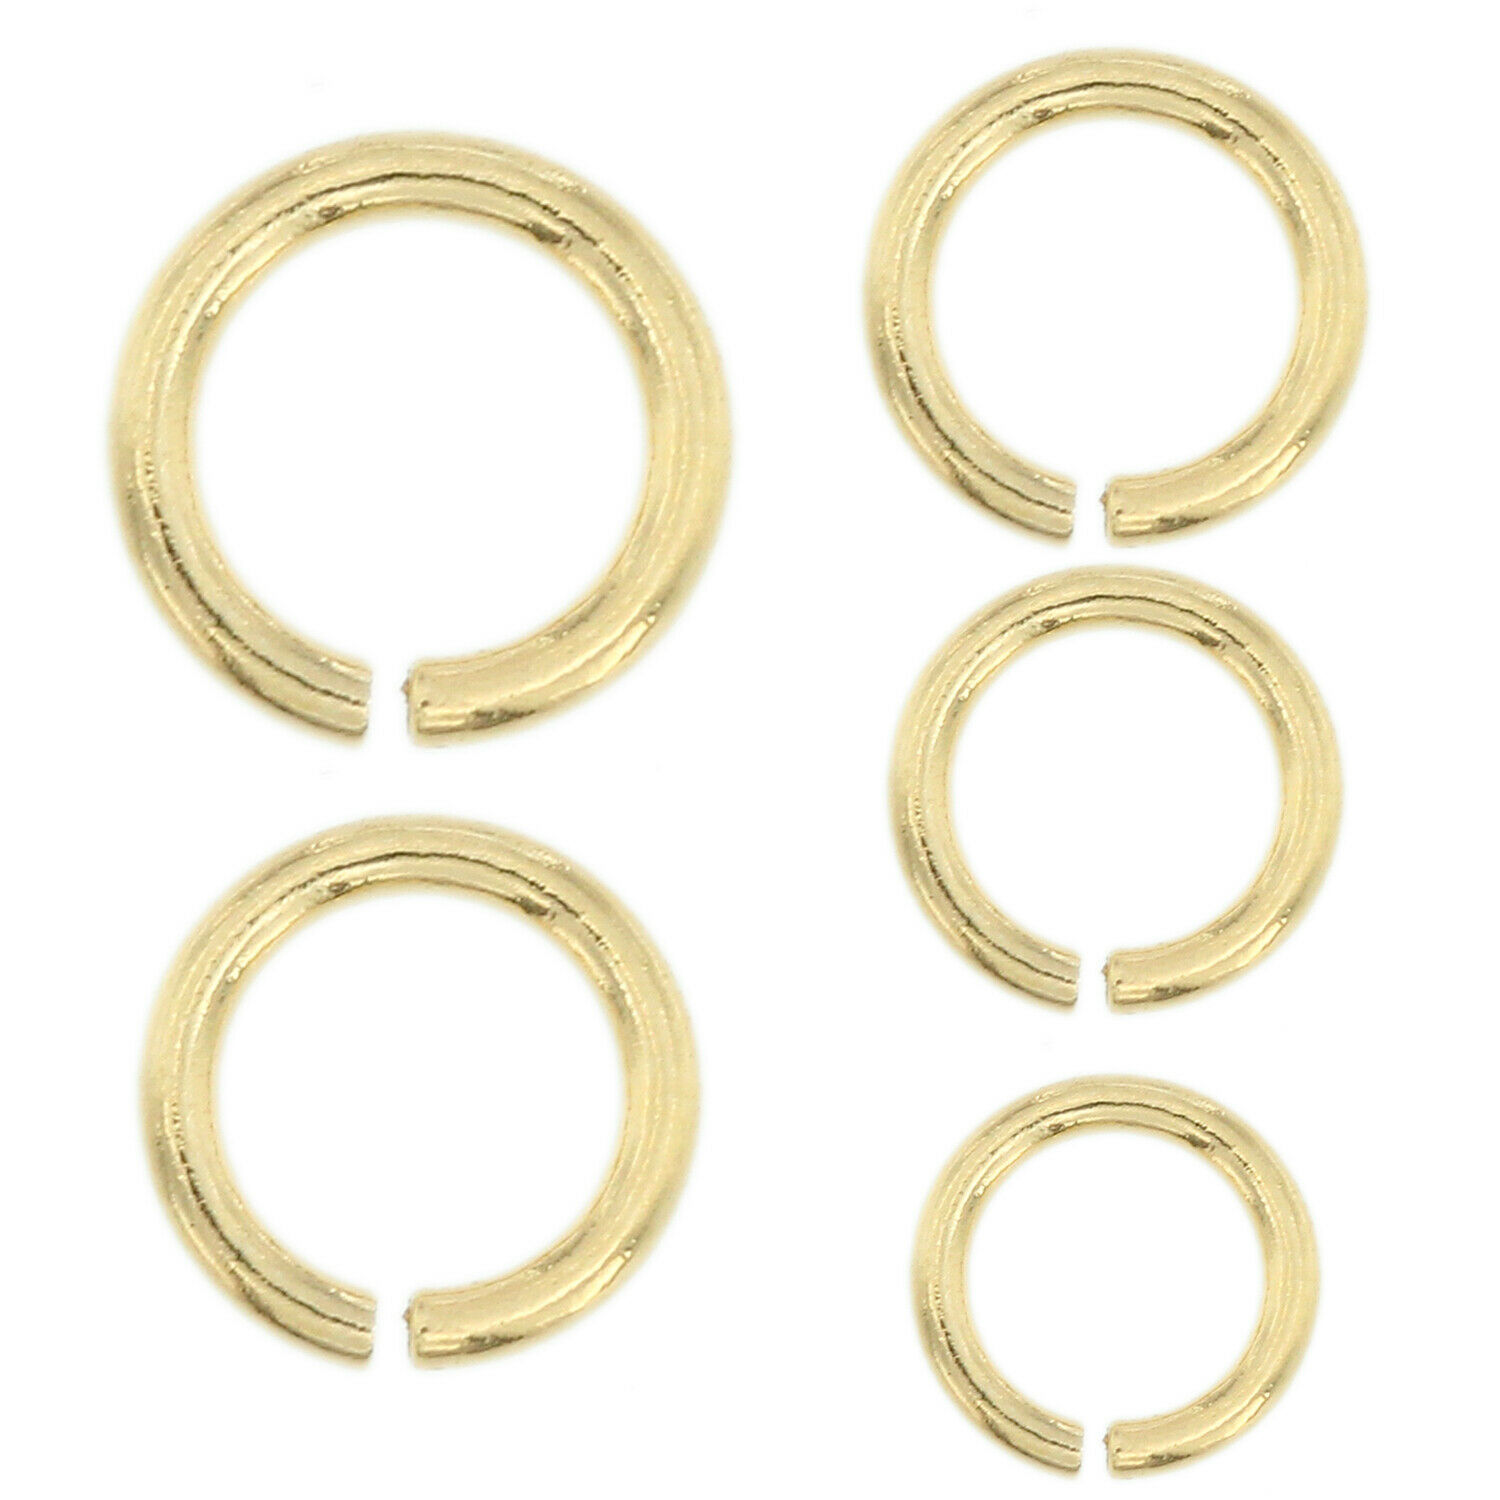 14k Solid Yellow Gold Jump Ring Round Open 2.5mm - 6mm Chain End 1 Piece Usa